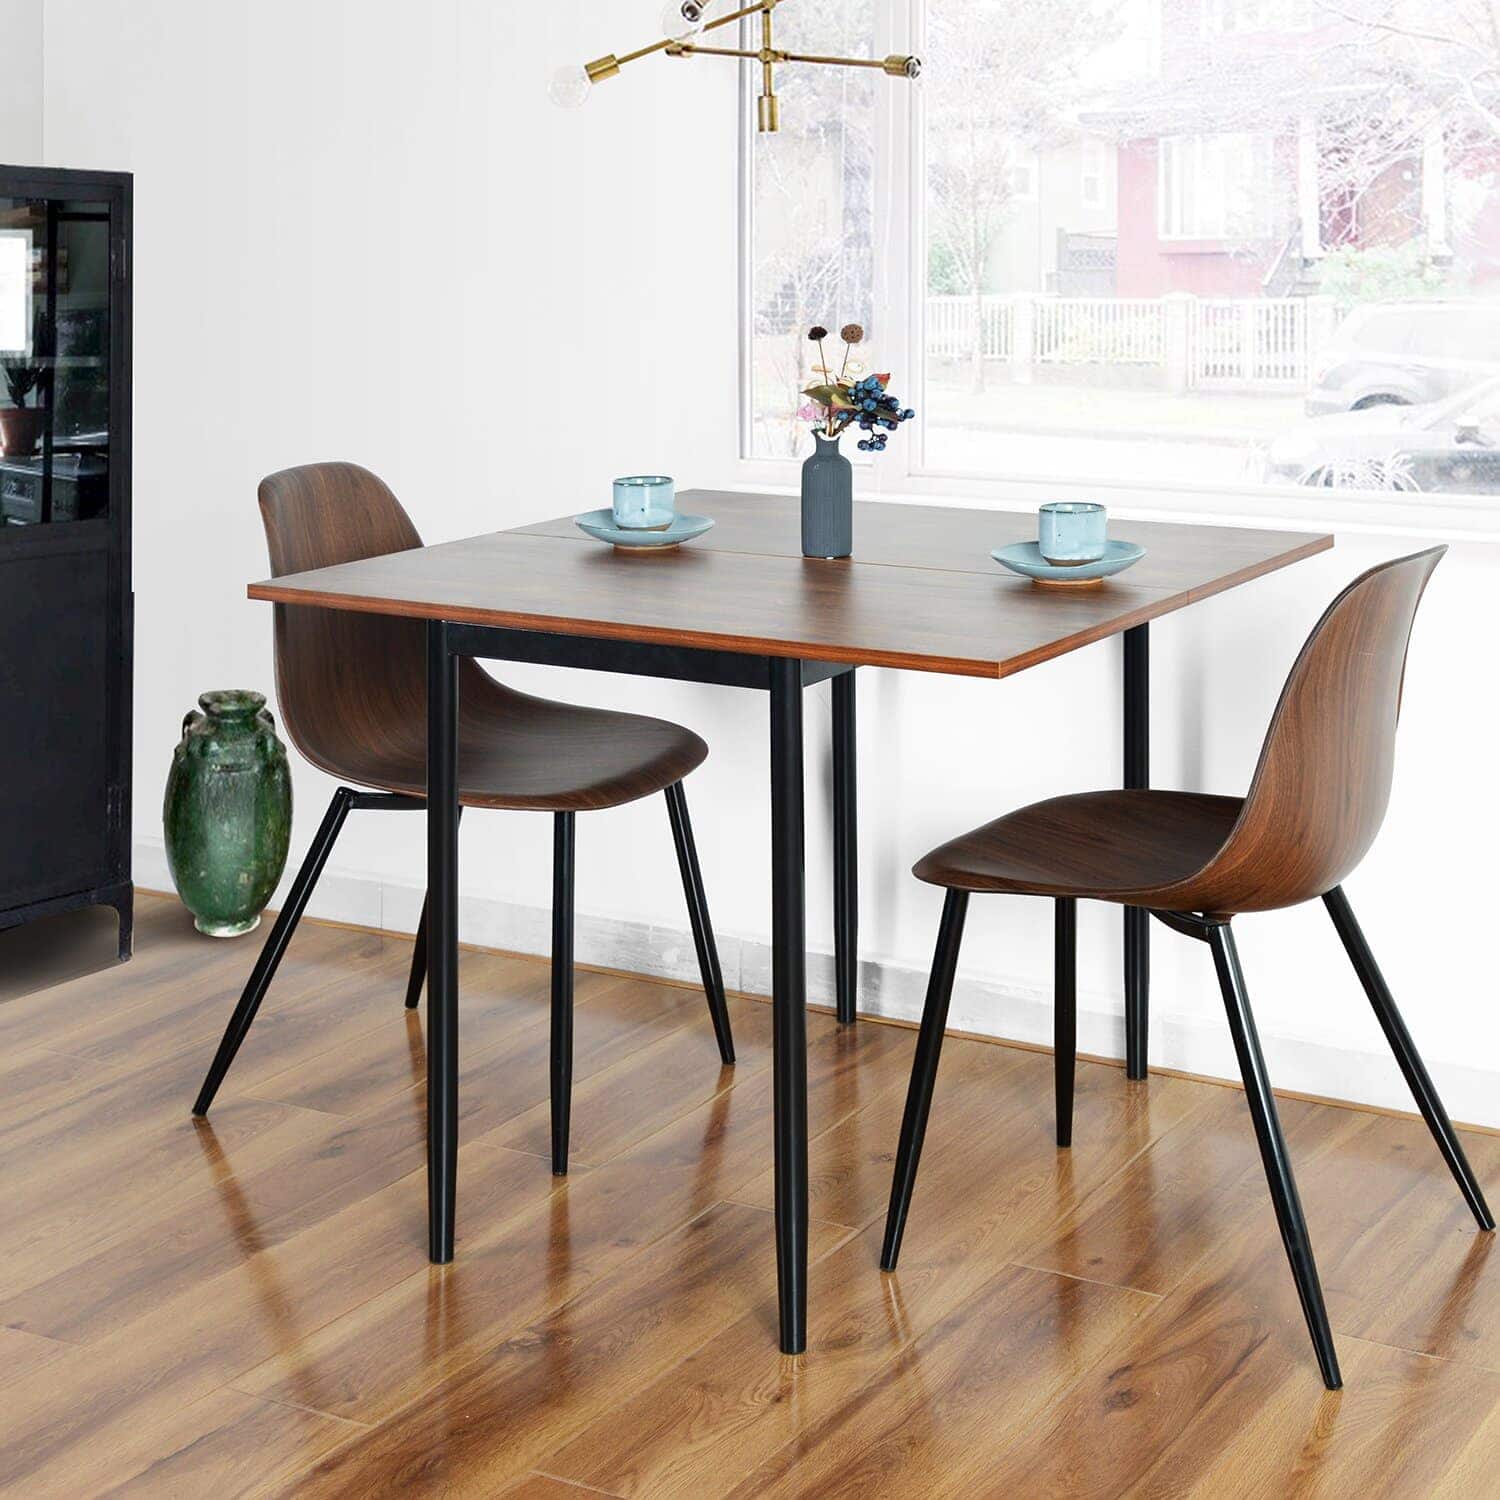 20 Dining Tables Ideas For Small Spaces, Round Dining Table Set For Small Spaces